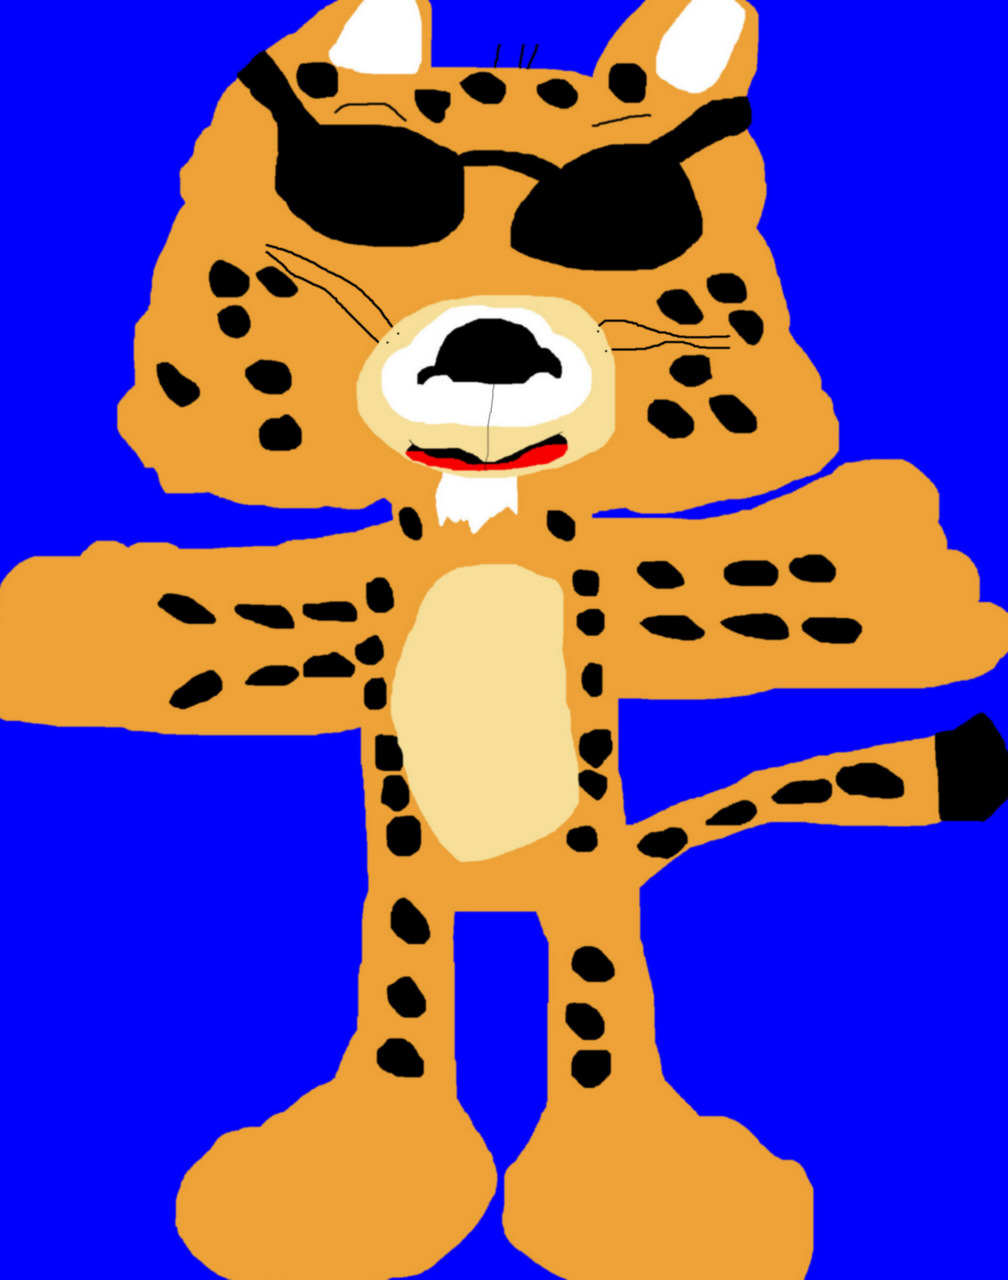 Chester Cheetah With No Shoes Or Gloves On MS Paint by Falconlobo